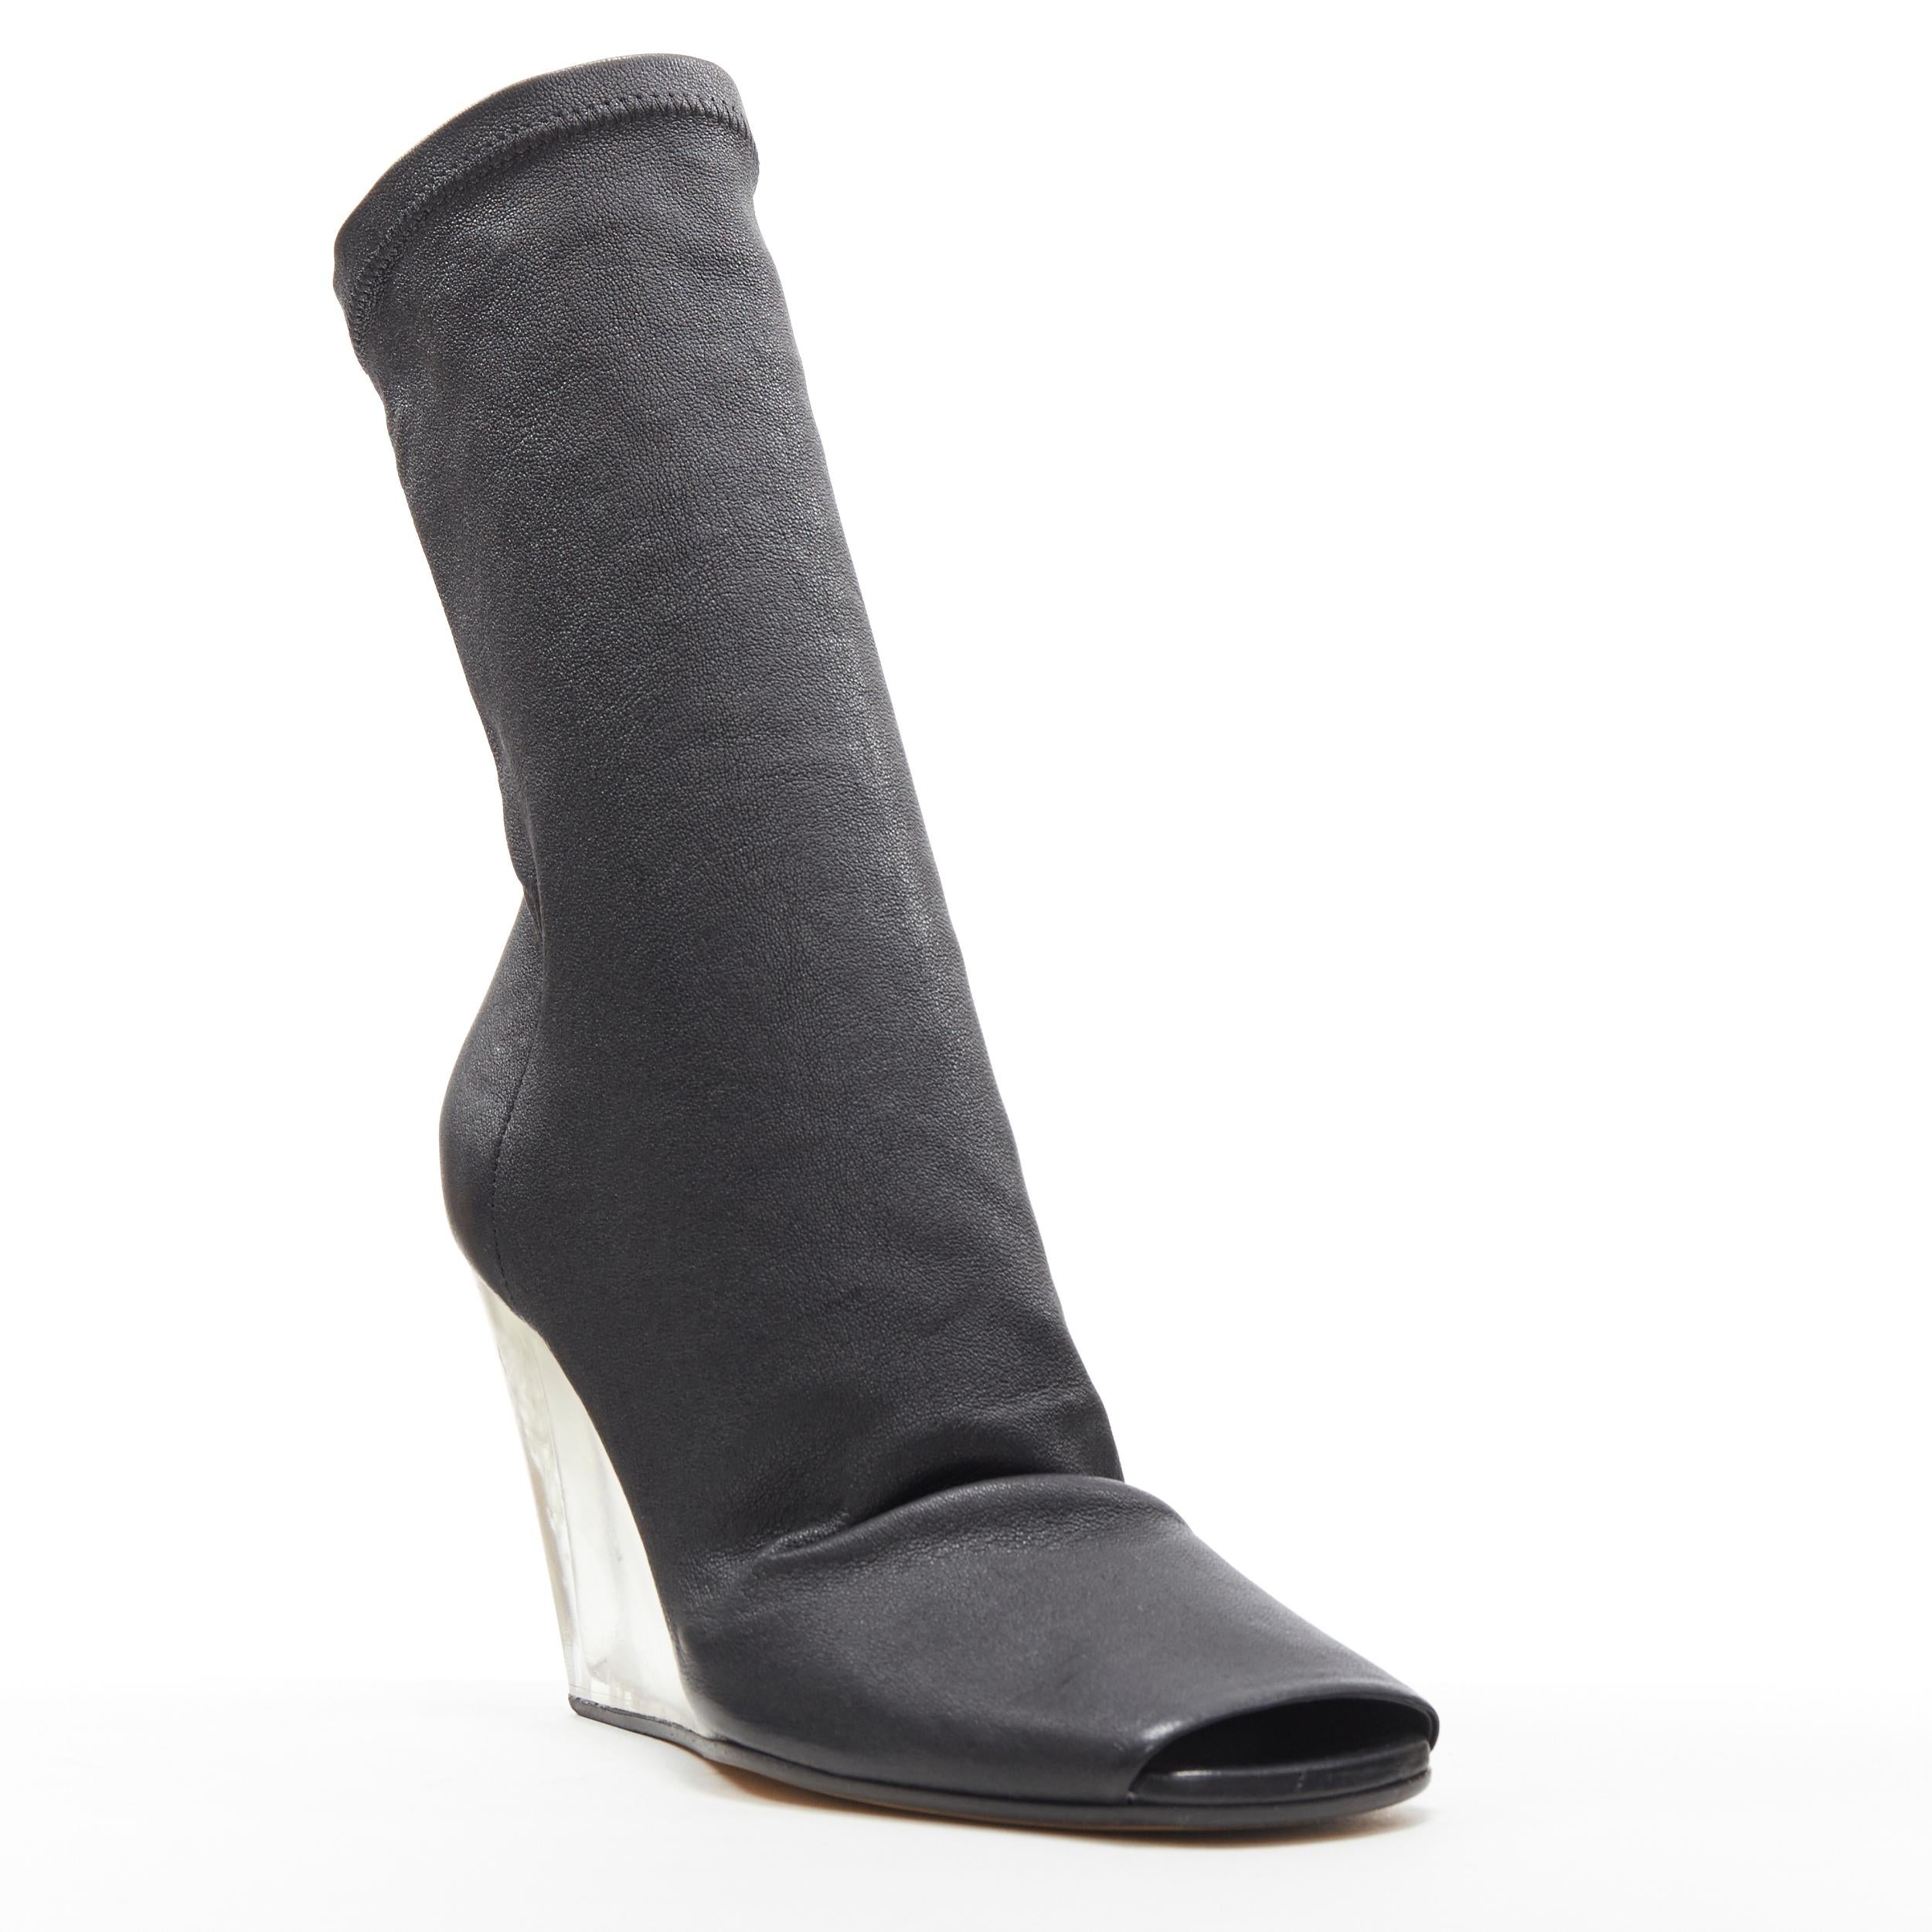 new RICK OWENS black soft leather square slit toe clear wedge sock boot EU37
Brand: Rick Owens
Designer: Rick Owens
Collection: Fall Winter 2018
Model Name / Style: Leather sock boot
Material: Leather
Color: Black
Pattern: Solid
Closure: Pull